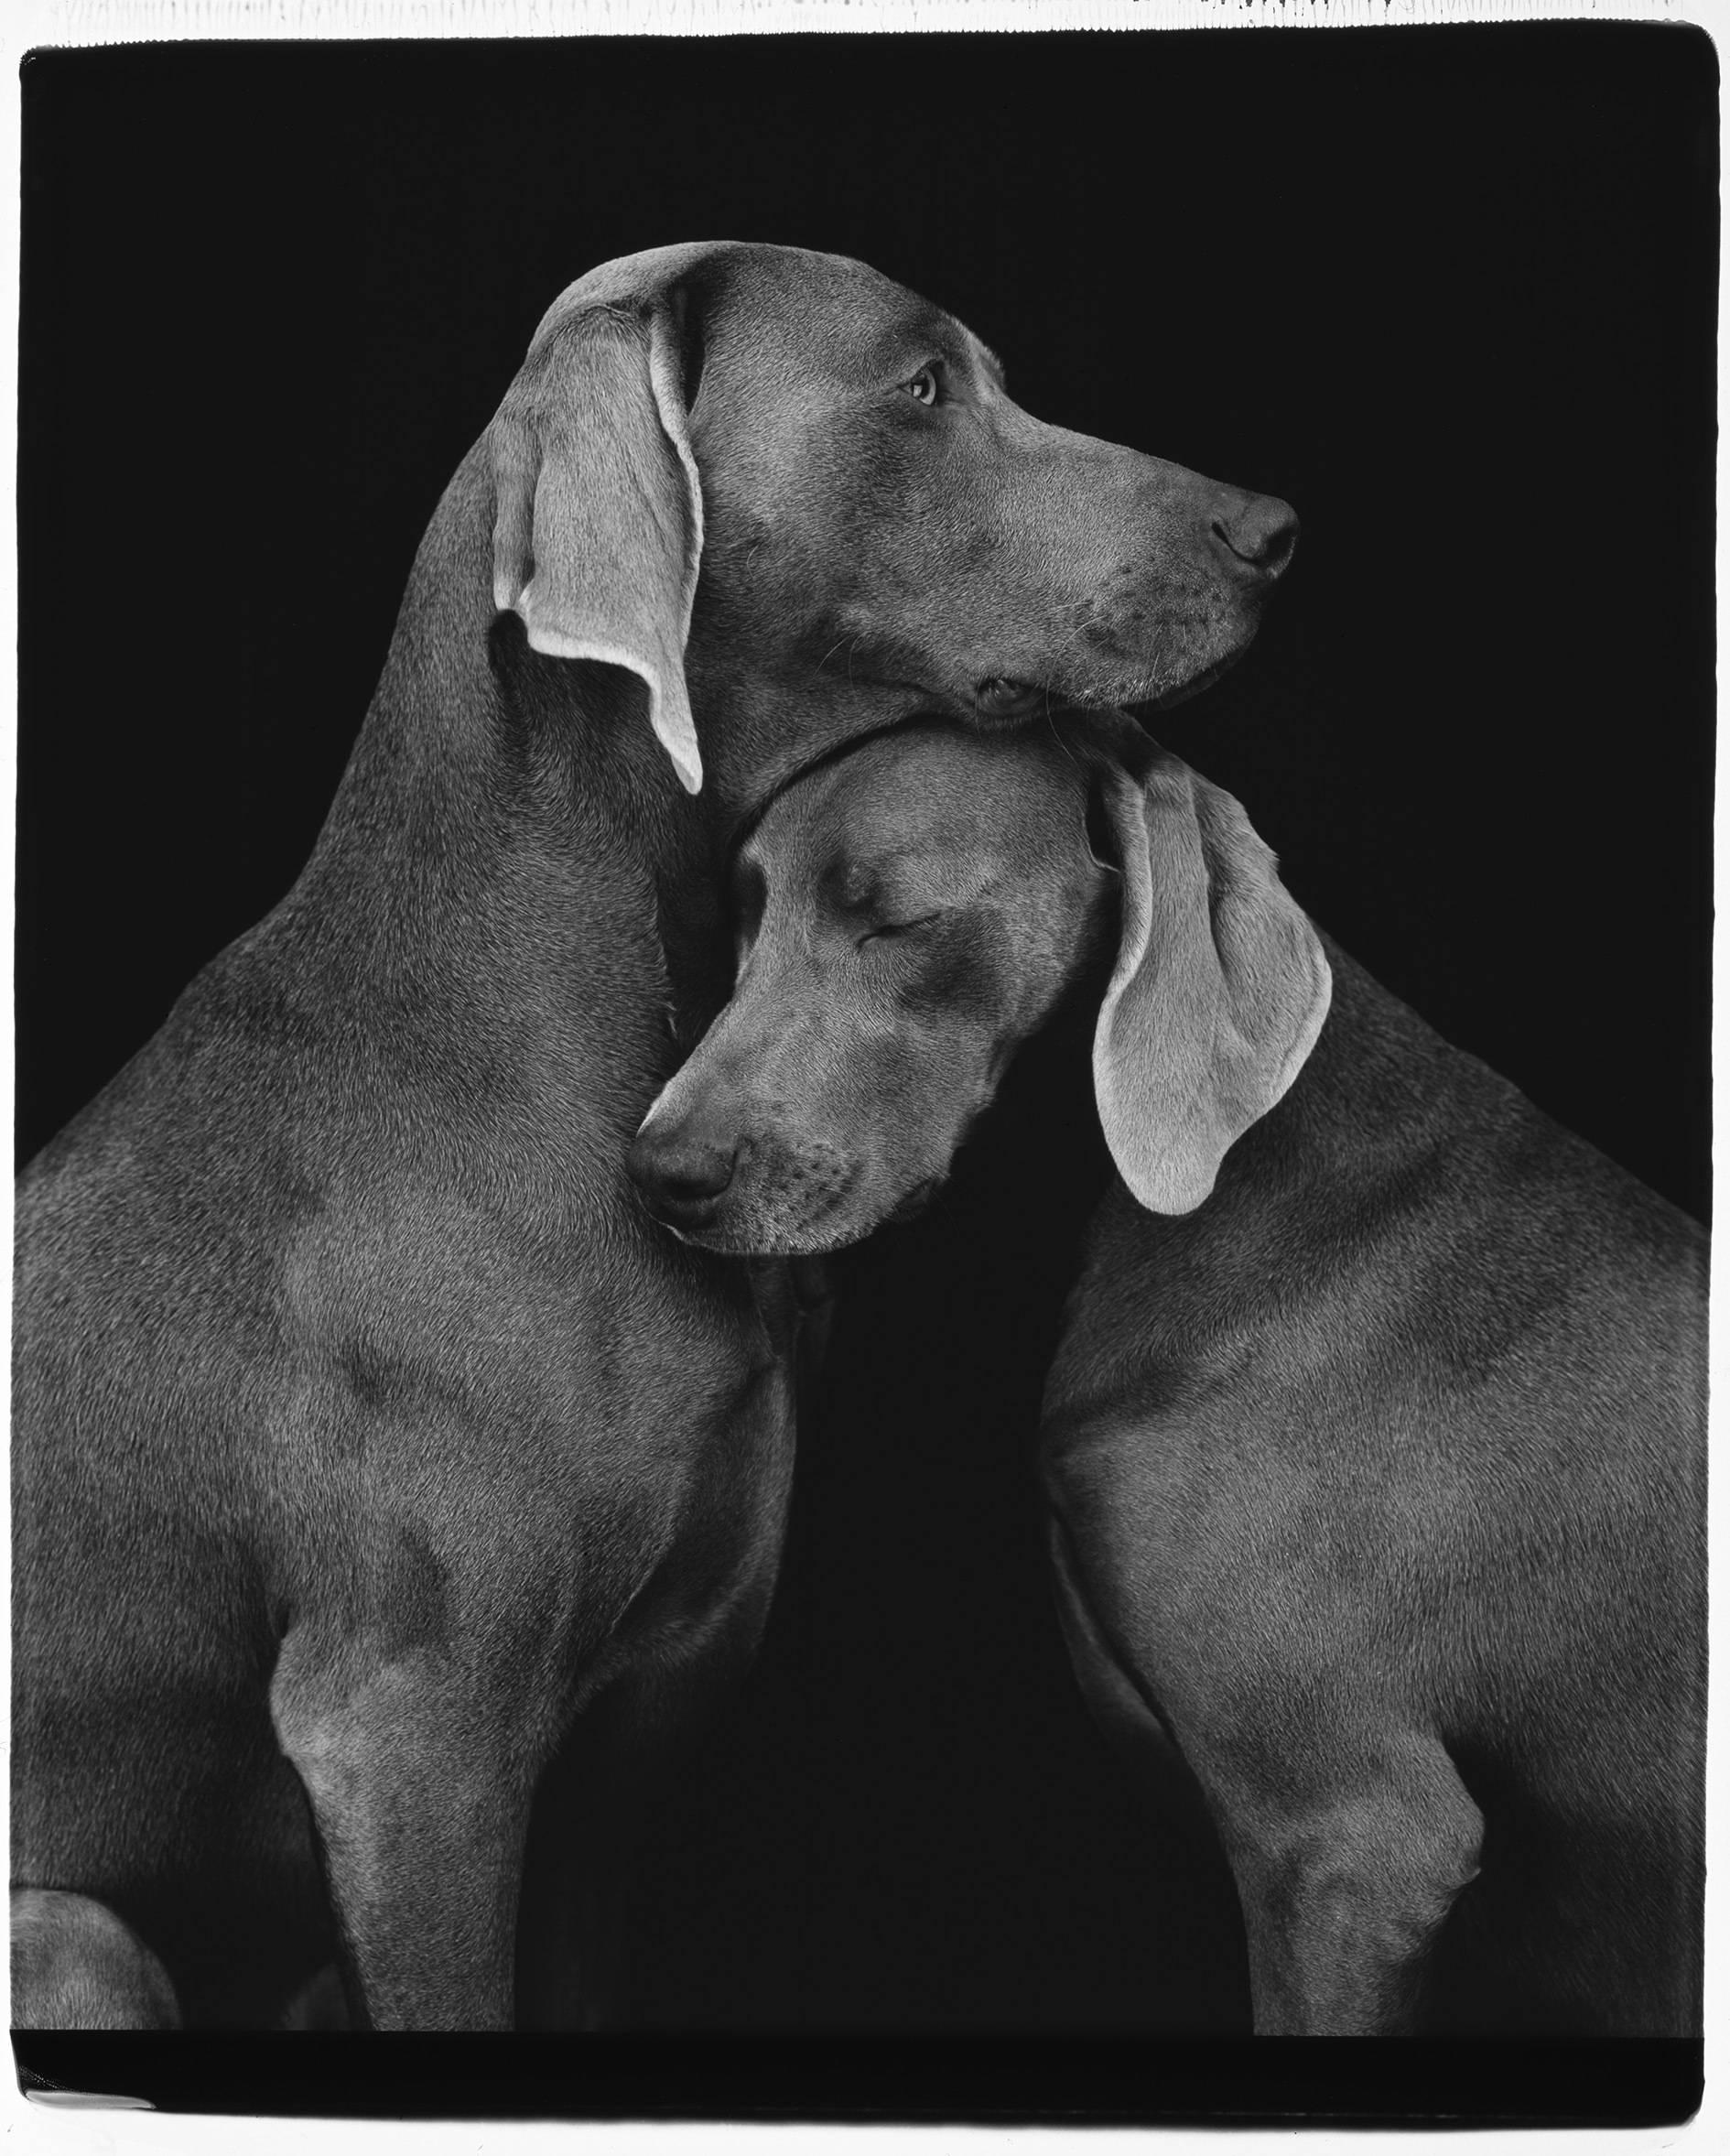 William Wegman
"Friends"
2010
Archival pigment printed on Museo Silver Rag
33 1/2 x 24 inches
Edition of 1500, signed
Unframed